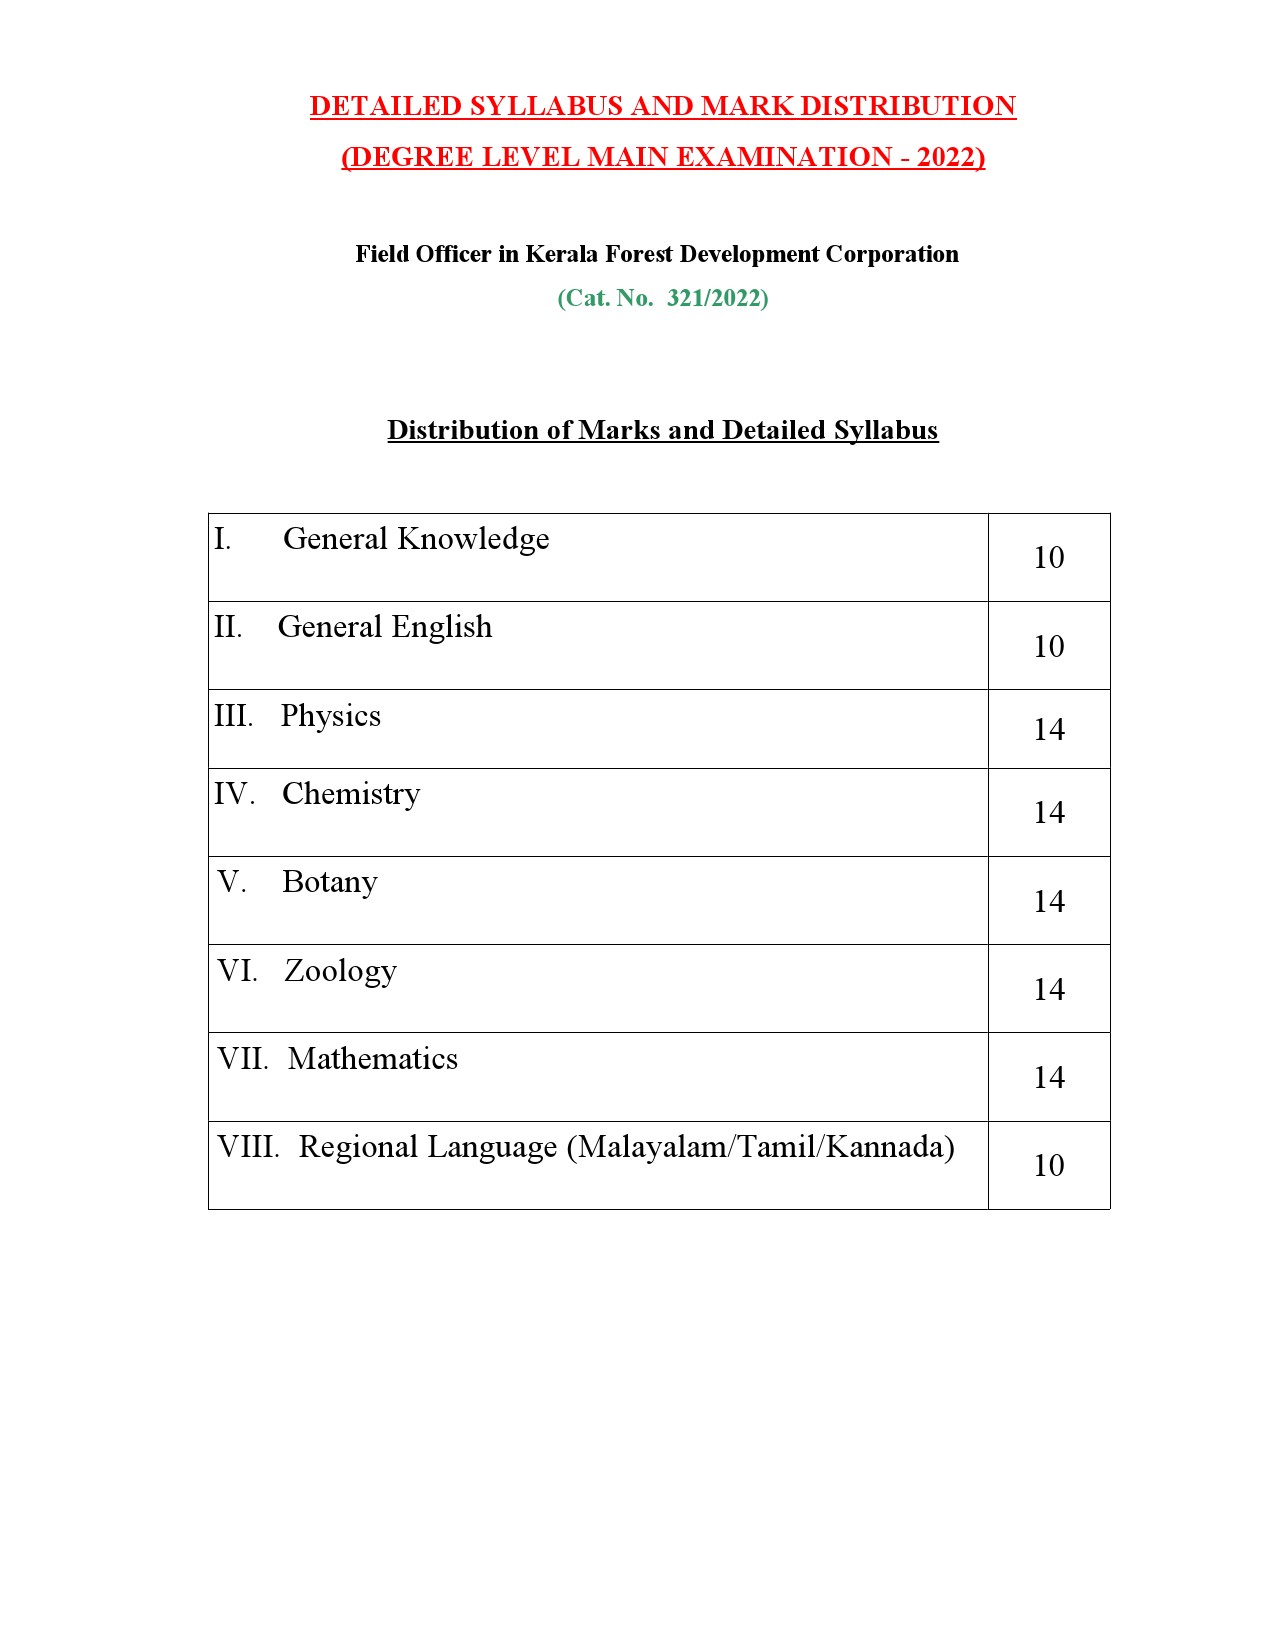 Syllabus 2023 for Field Officer in Kerala Forest Development Corporation - Notification Image 1